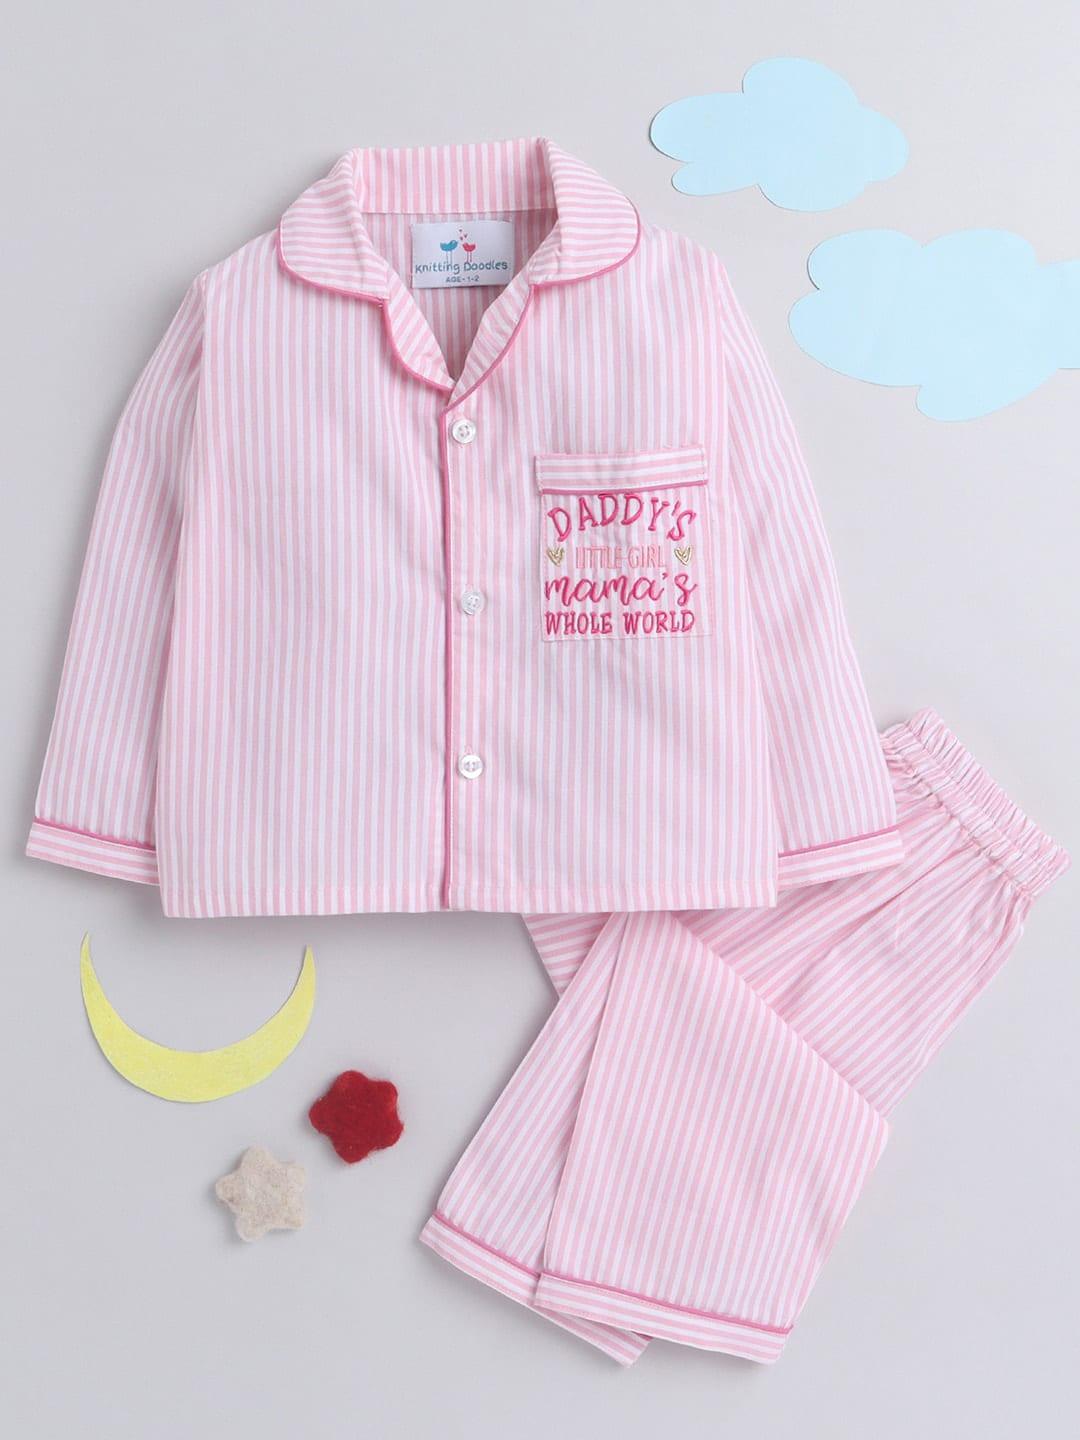 knitting doodles kids pink & off white striped night suit